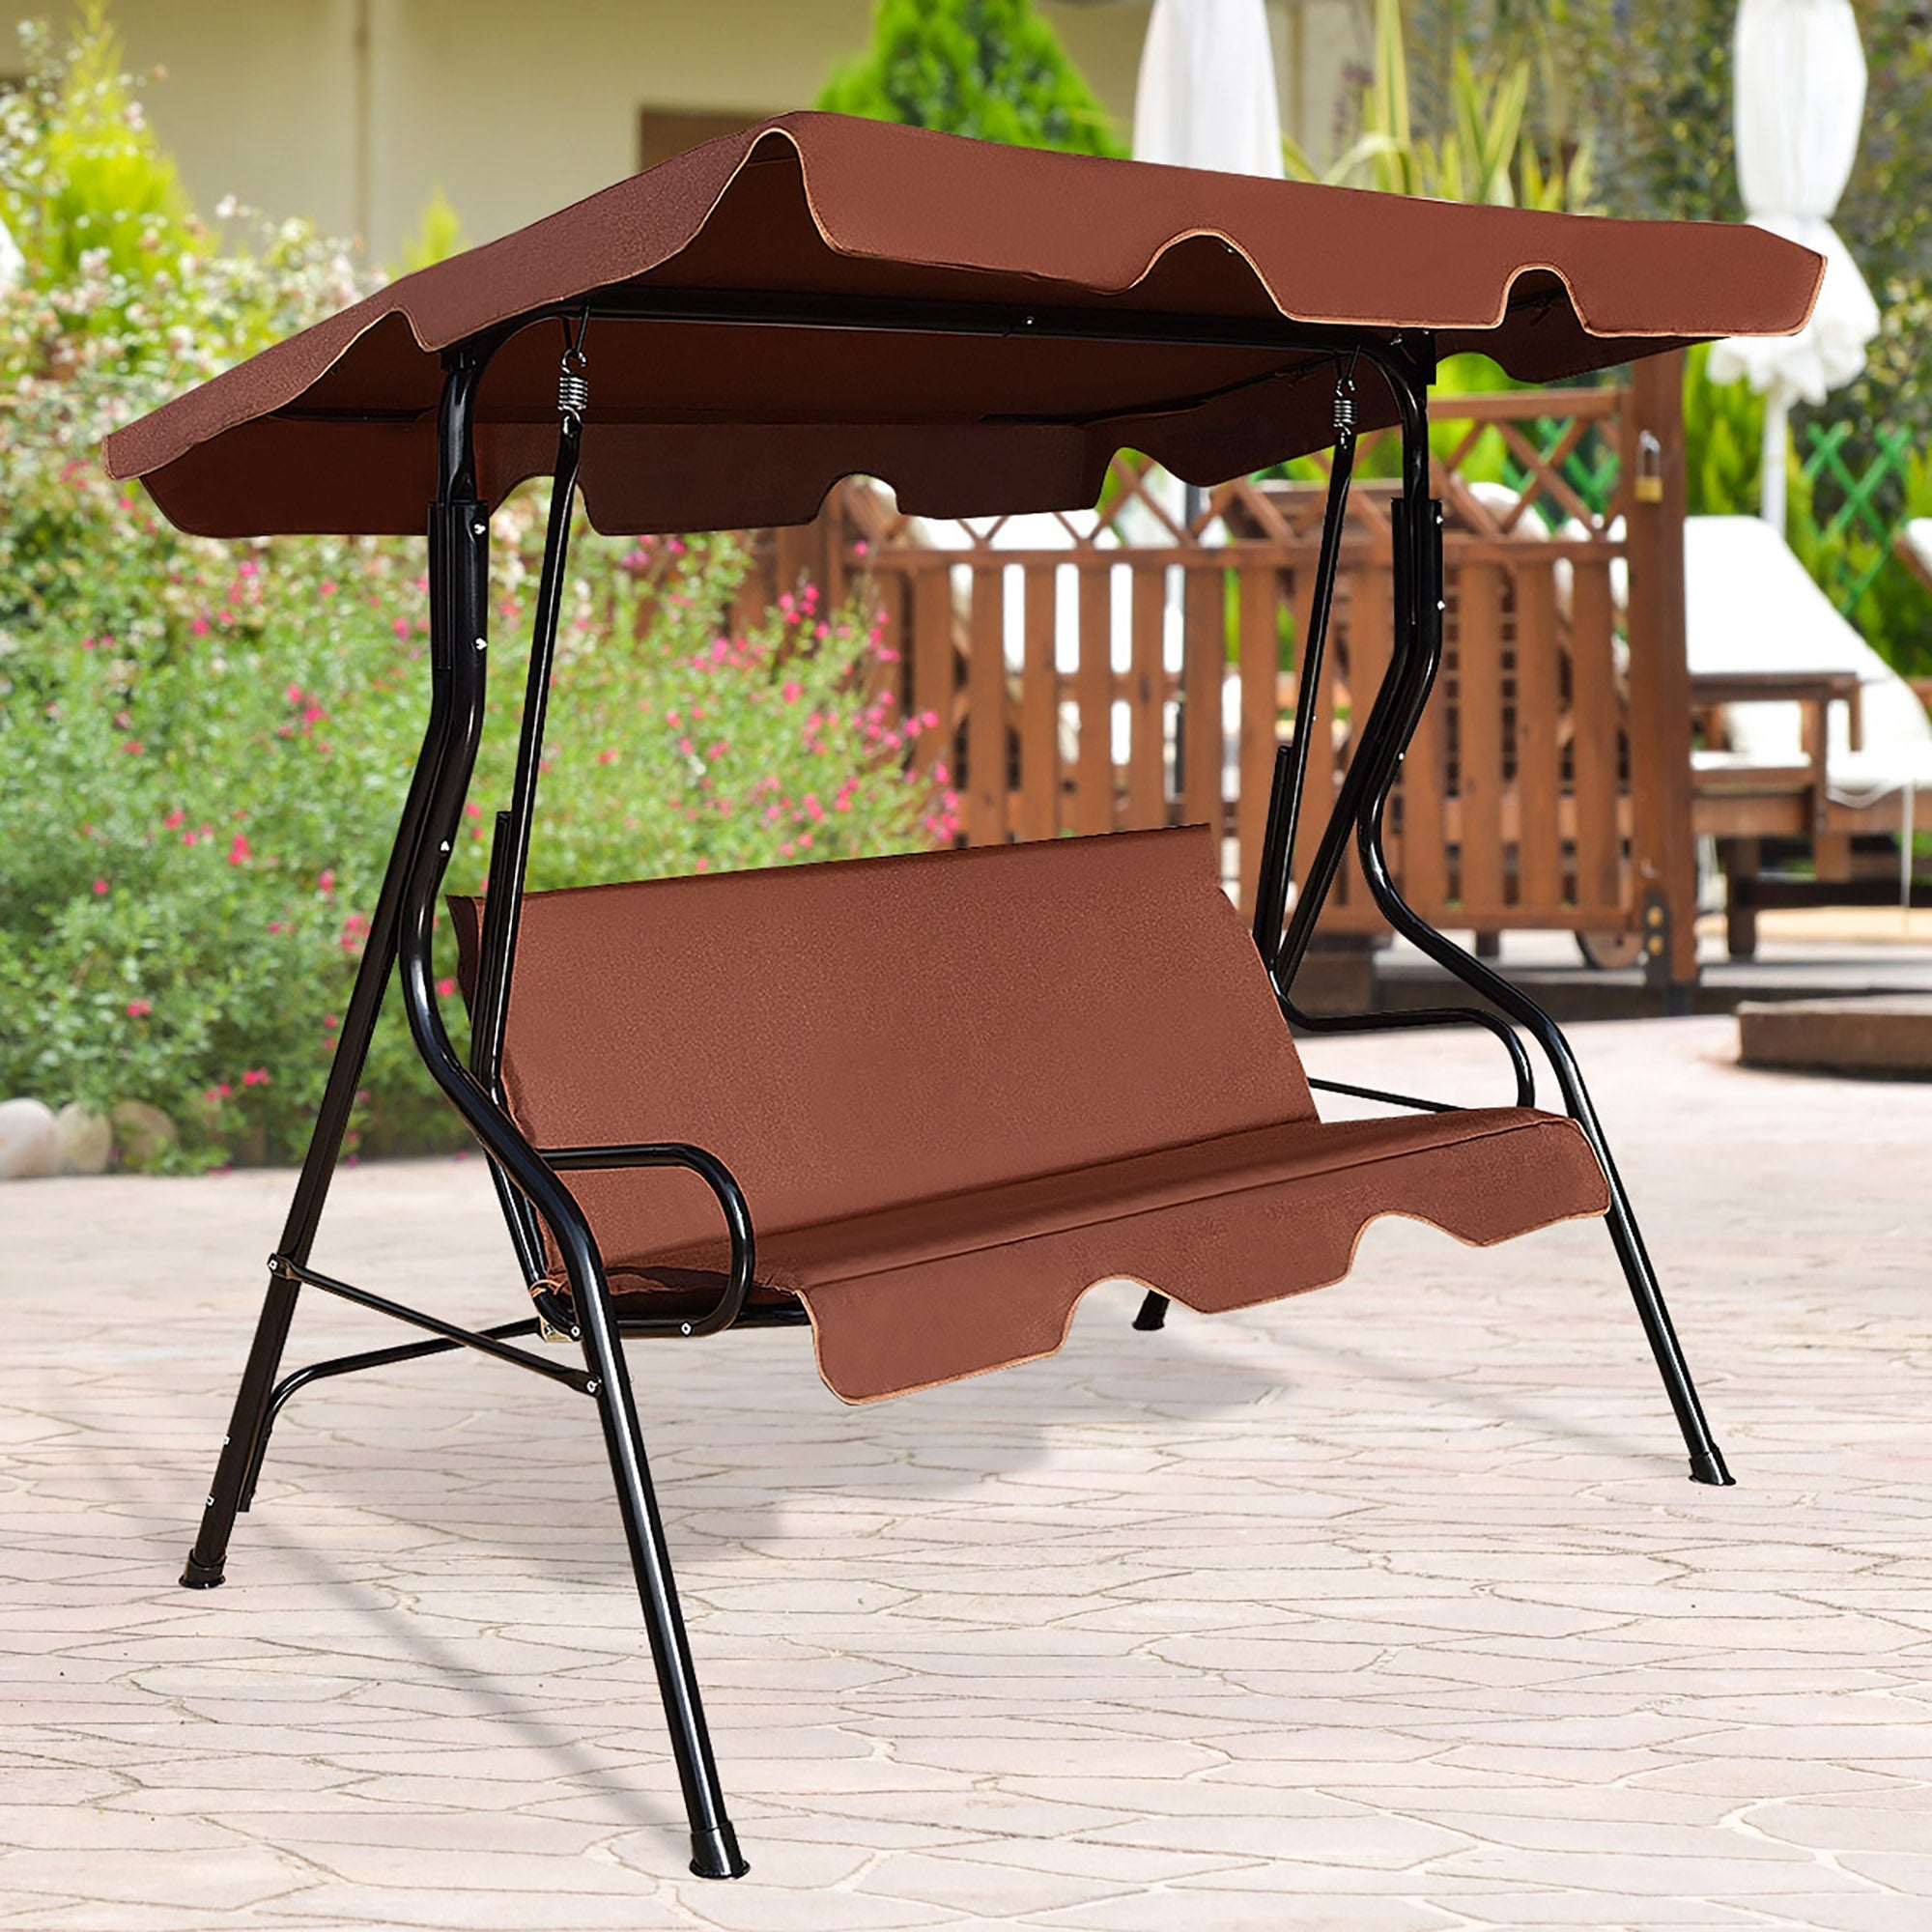 Suitable for Patio All Weather Resistant Swing Bench Balcony Garden Steel Frame with Polyester Angle Adjustable Canopy Brown Poolside Tangkula 3 Person Patio Swing 